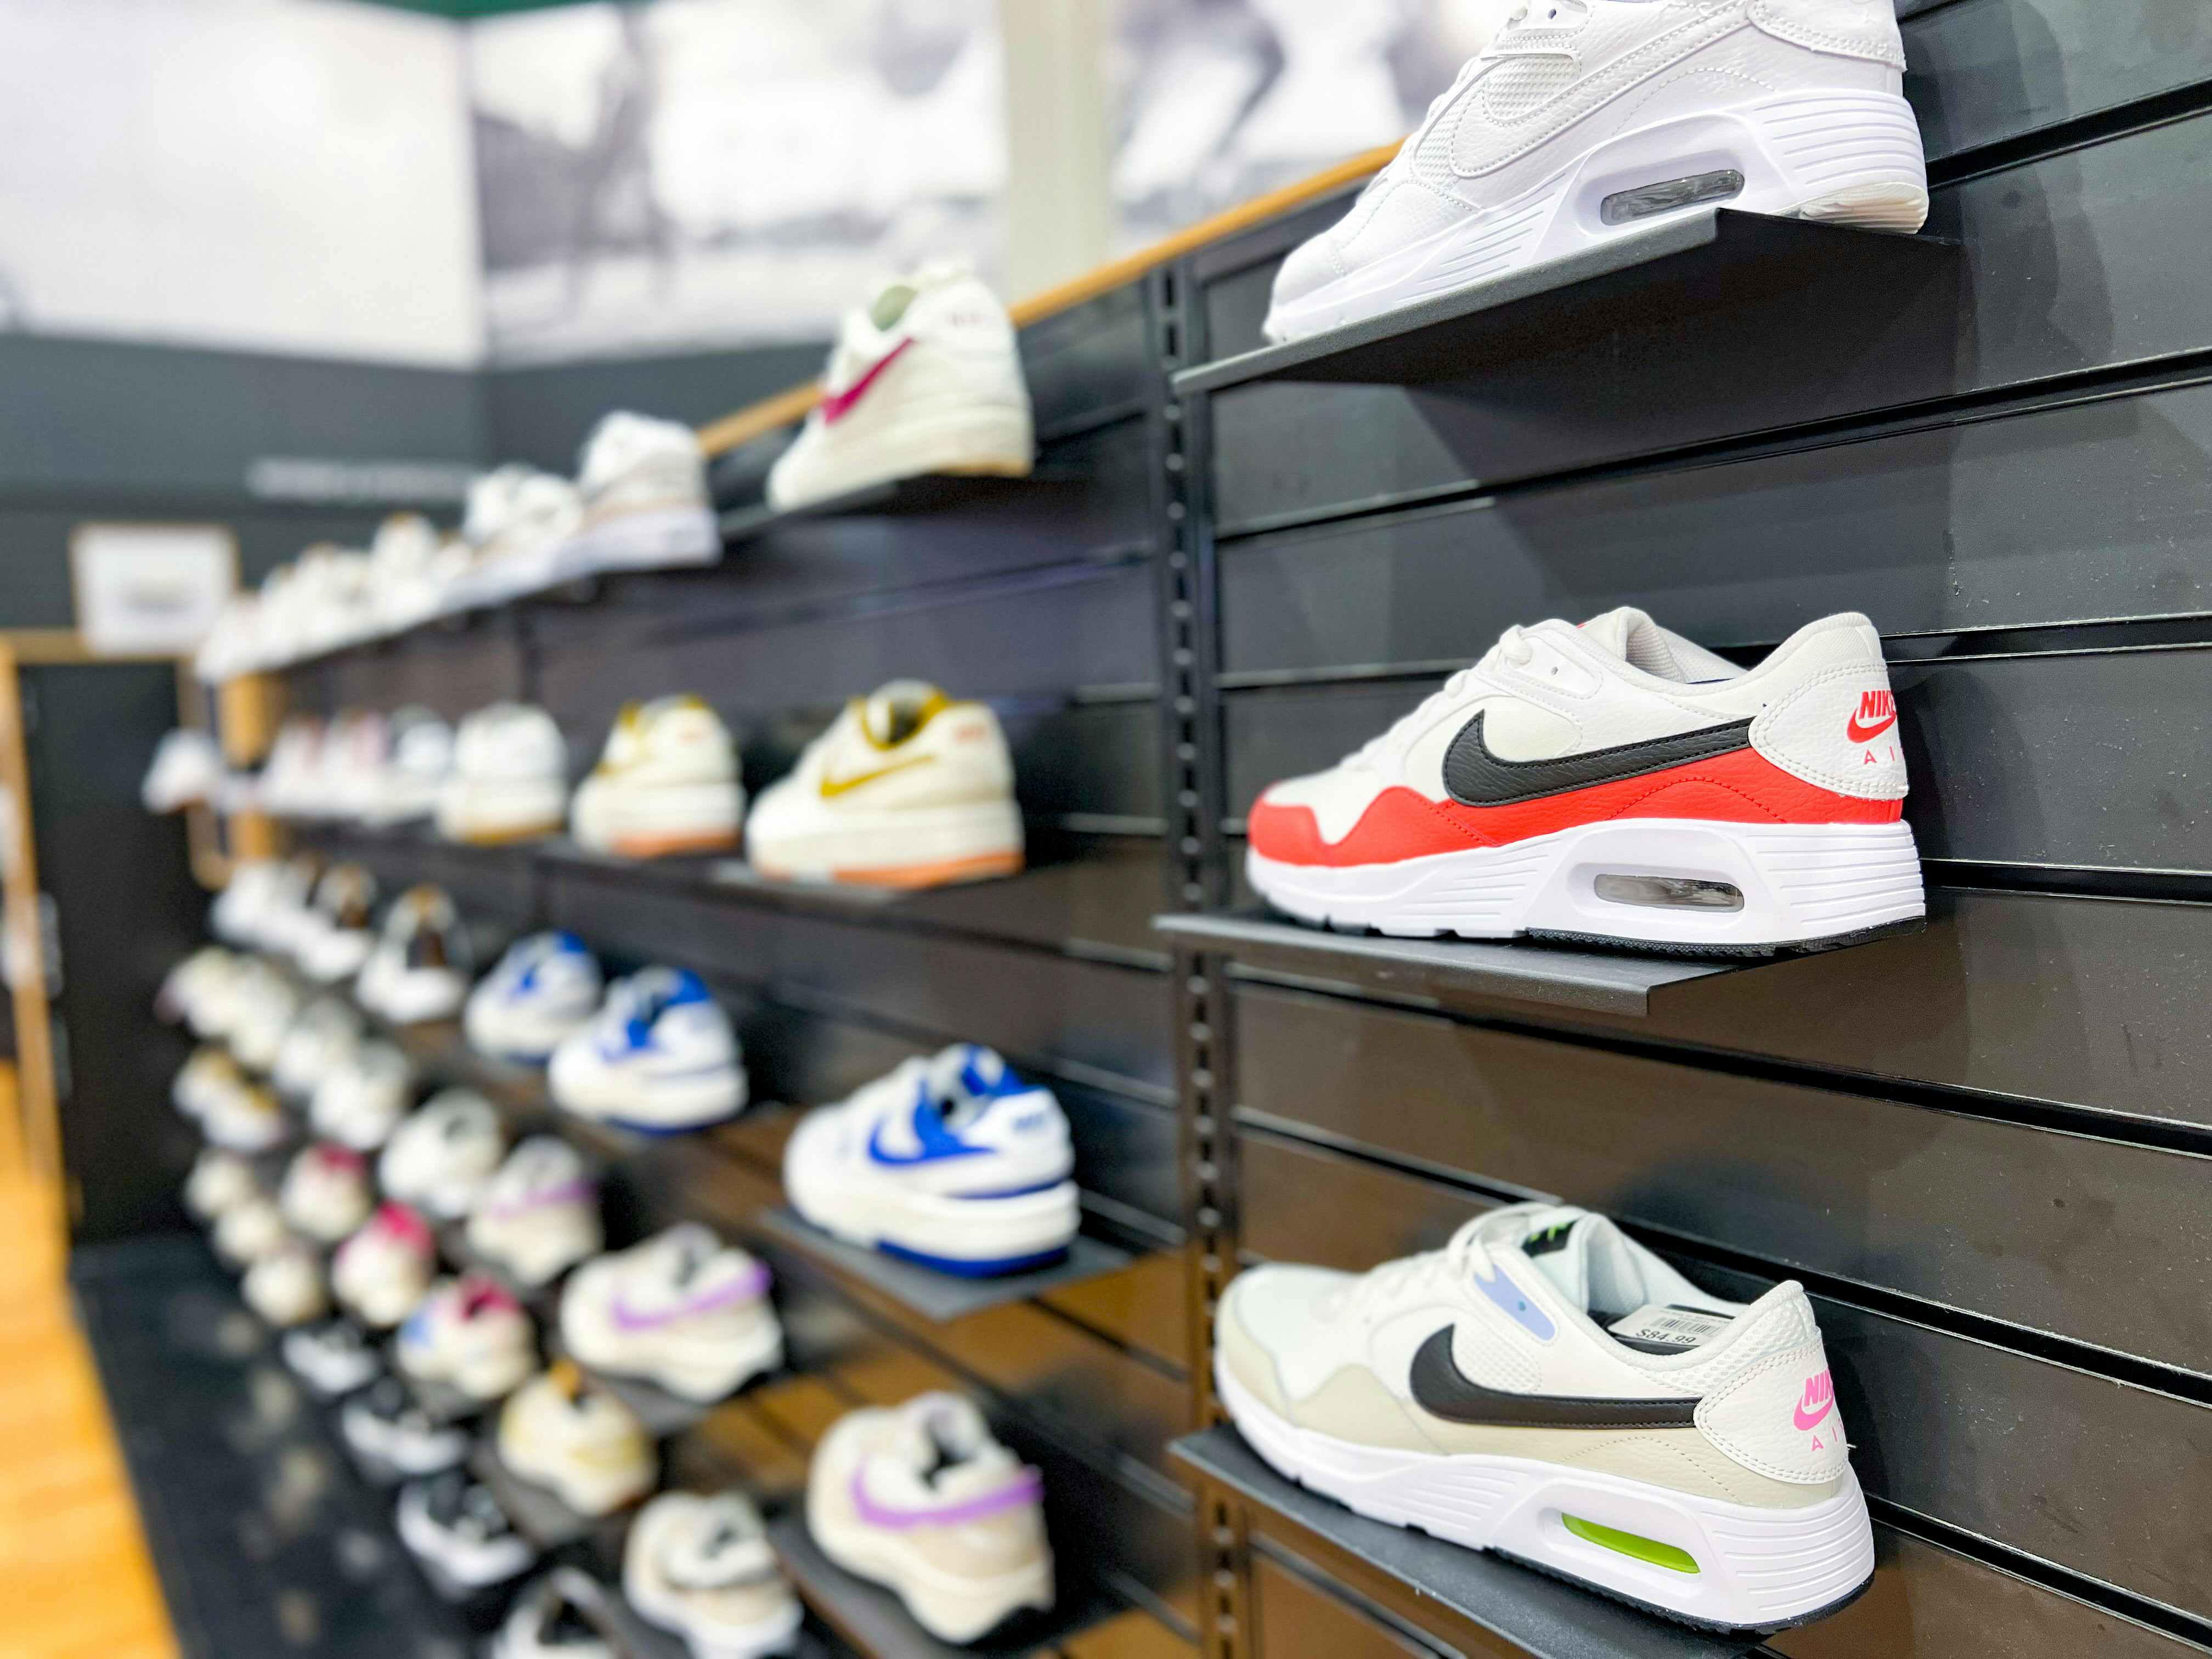 Nike's Shoe Sales Are Hot: $20 Jordan Slides, $39 Court Shoes, and More